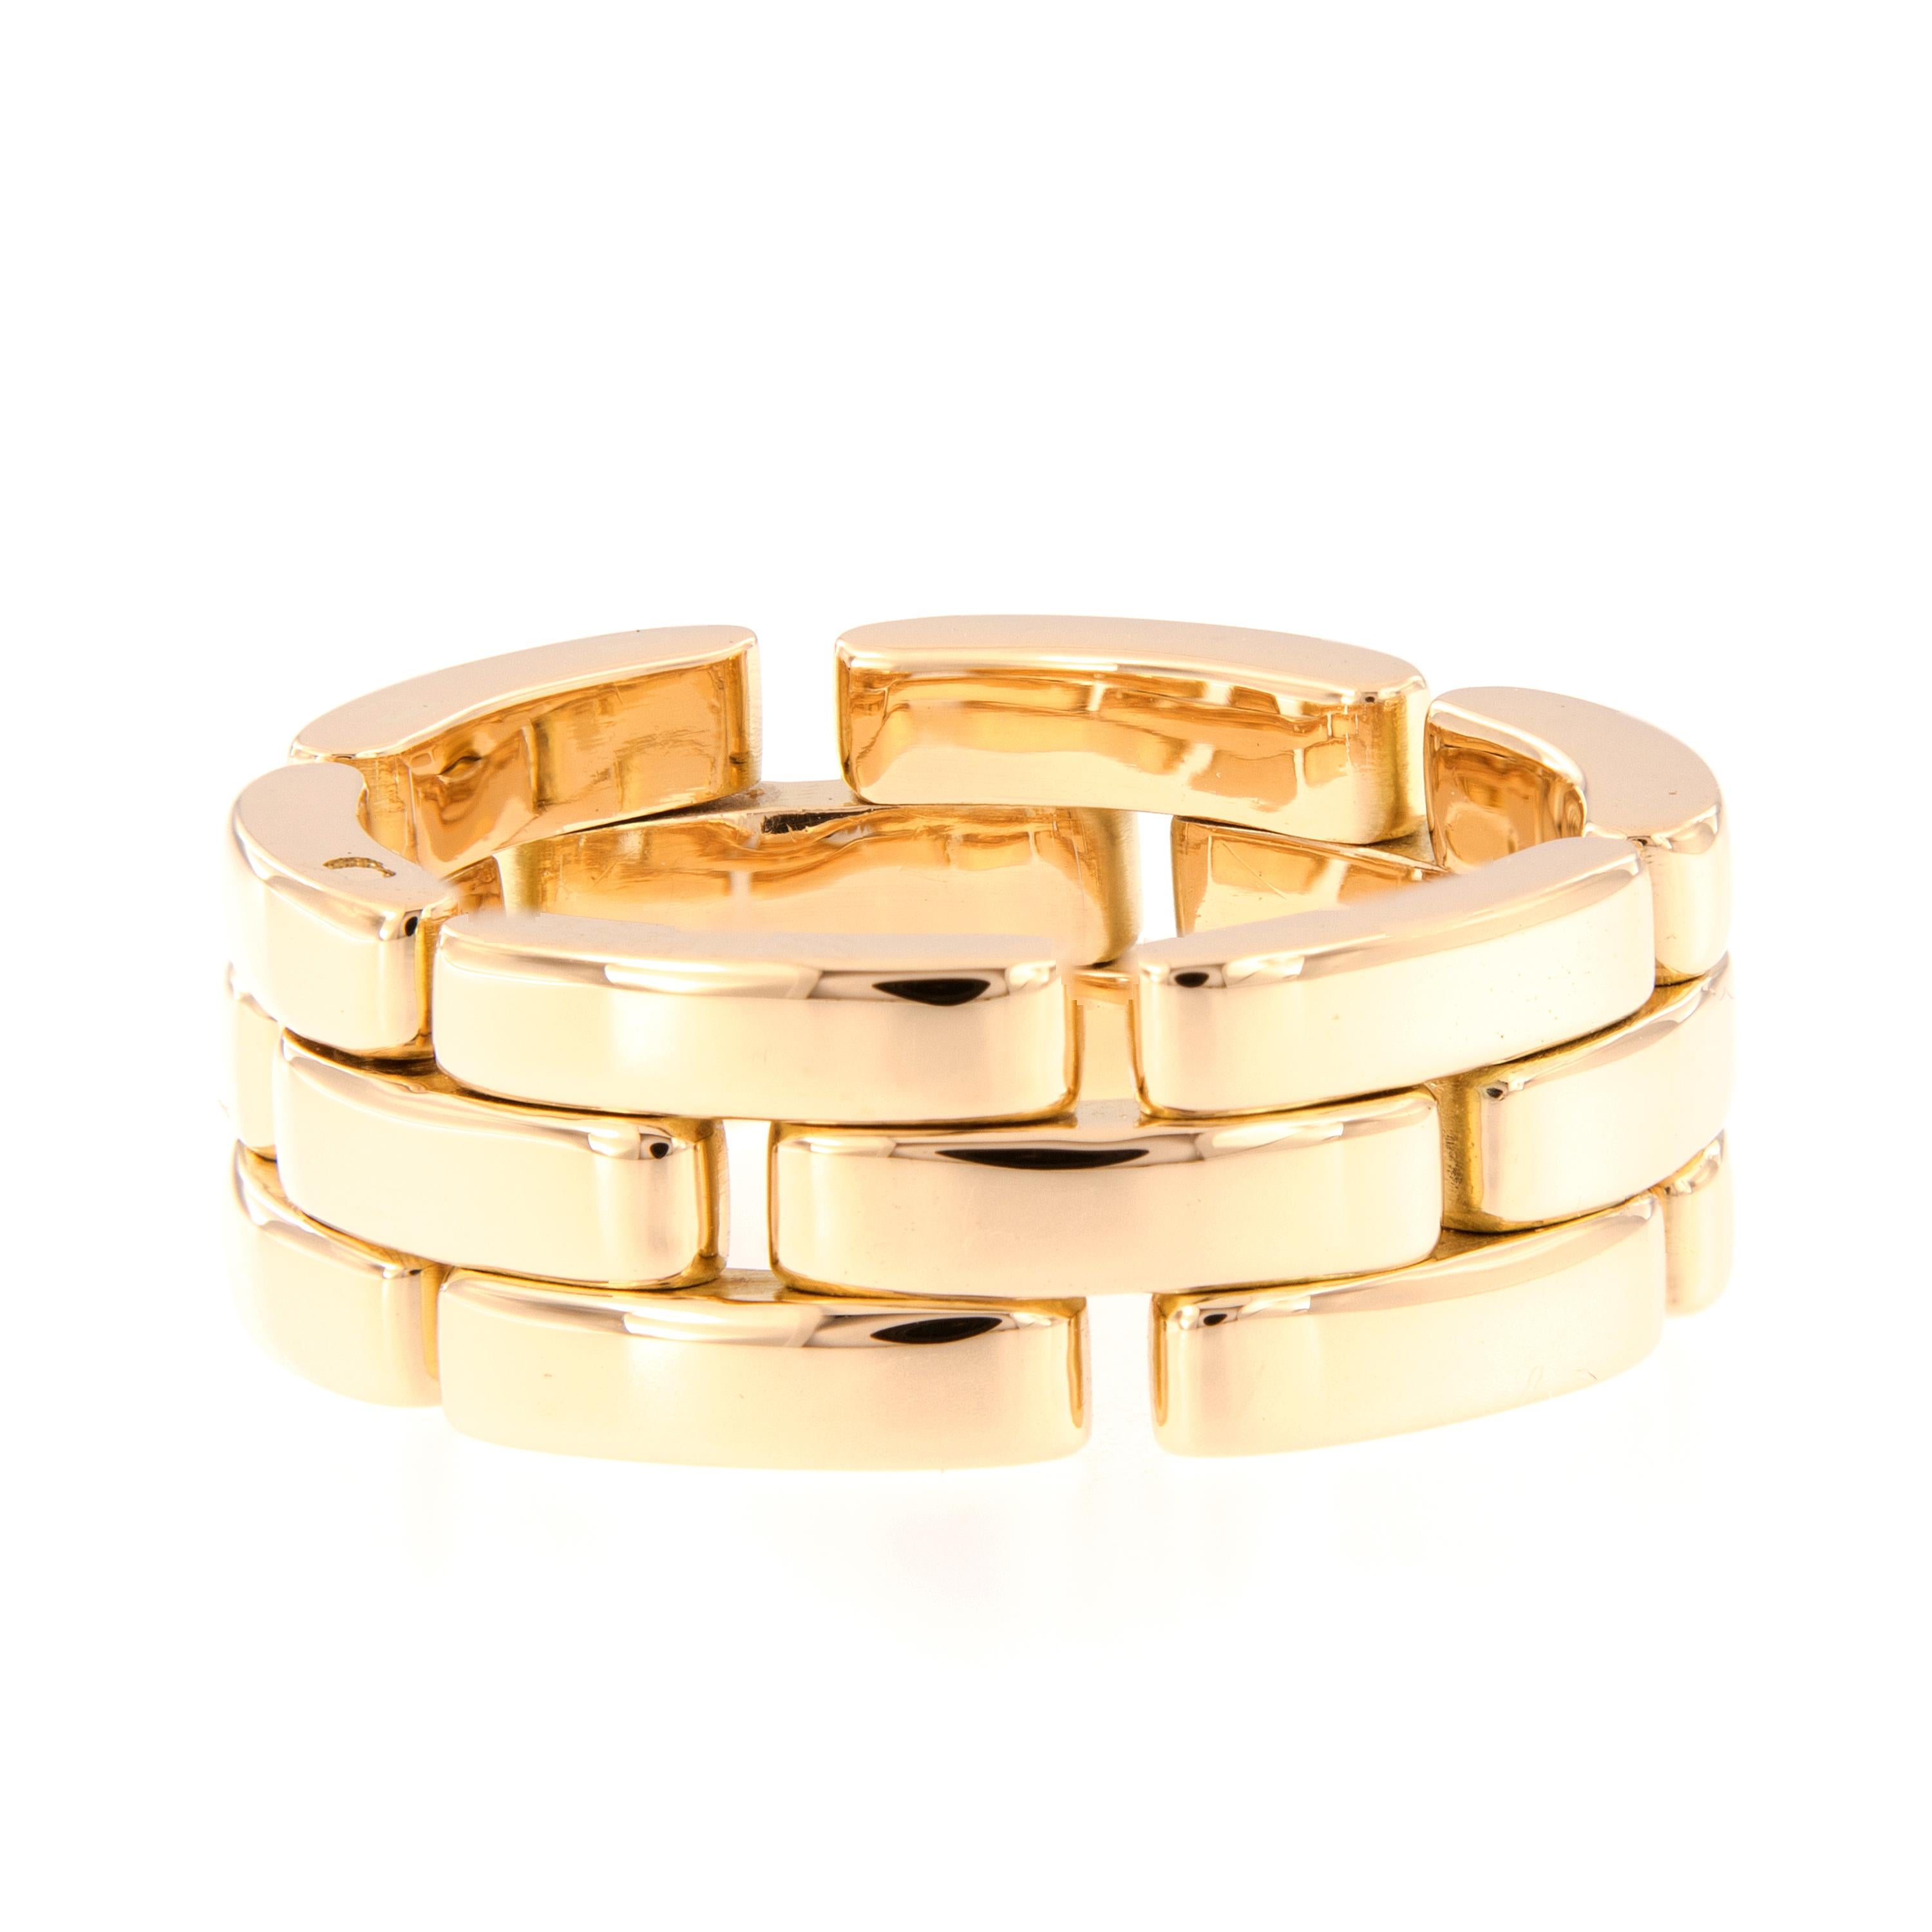 Link band ring by Cartier from the Maillon Panthere Collection is crafted in 18k yellow gold. This previously owned ring is in excellent condition. The ring is 8mm wide. Marked Cartier, ring size, serial number, and metal content. We also have the